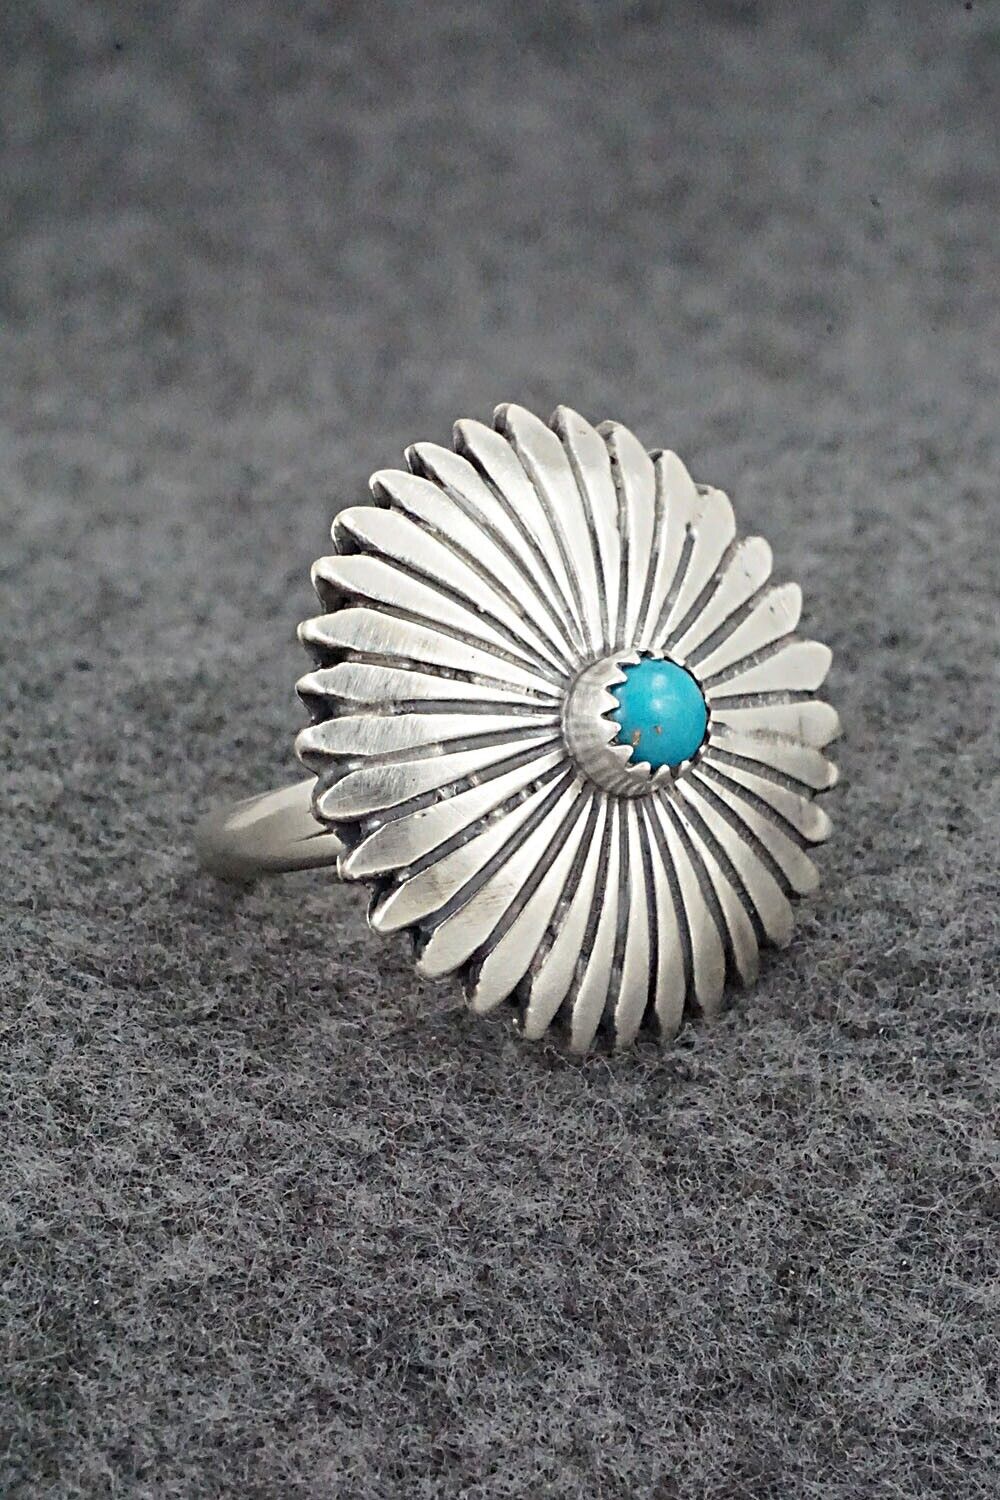 Turquoise & Sterling Silver Ring - Alice Rose Saunders - Size 7.75